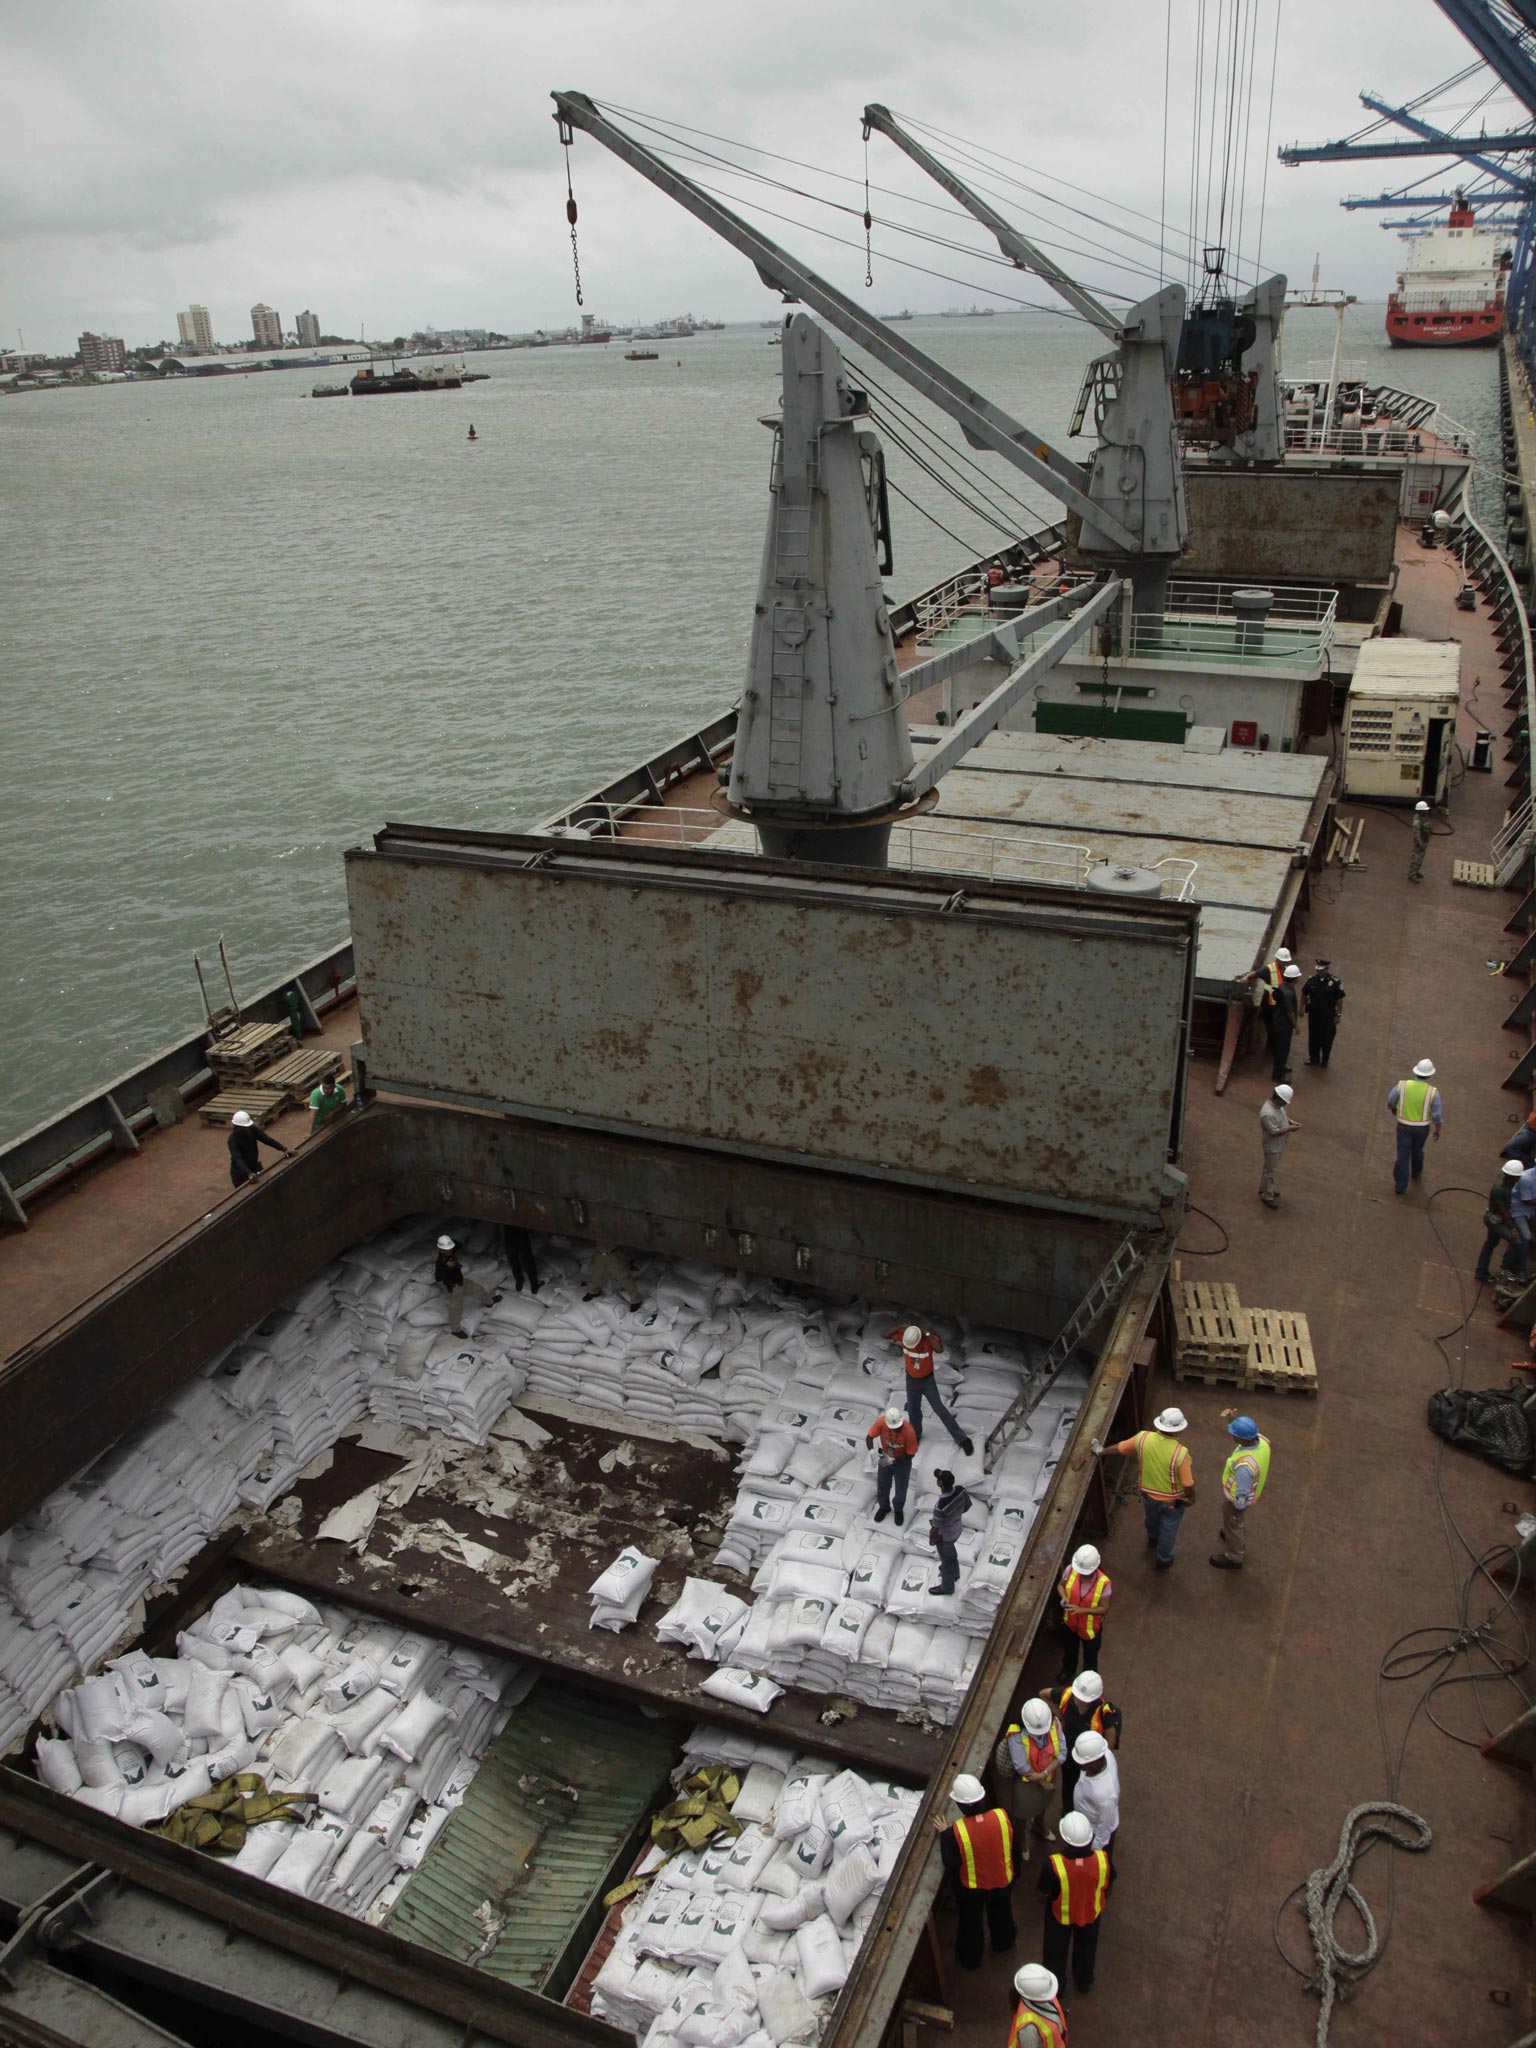 Panamanian workers stand on top of sacks of sugar inside a container aboard a North Korean-flagged ship at the Manzanillo International container terminal on the coast of Colon City, Panama